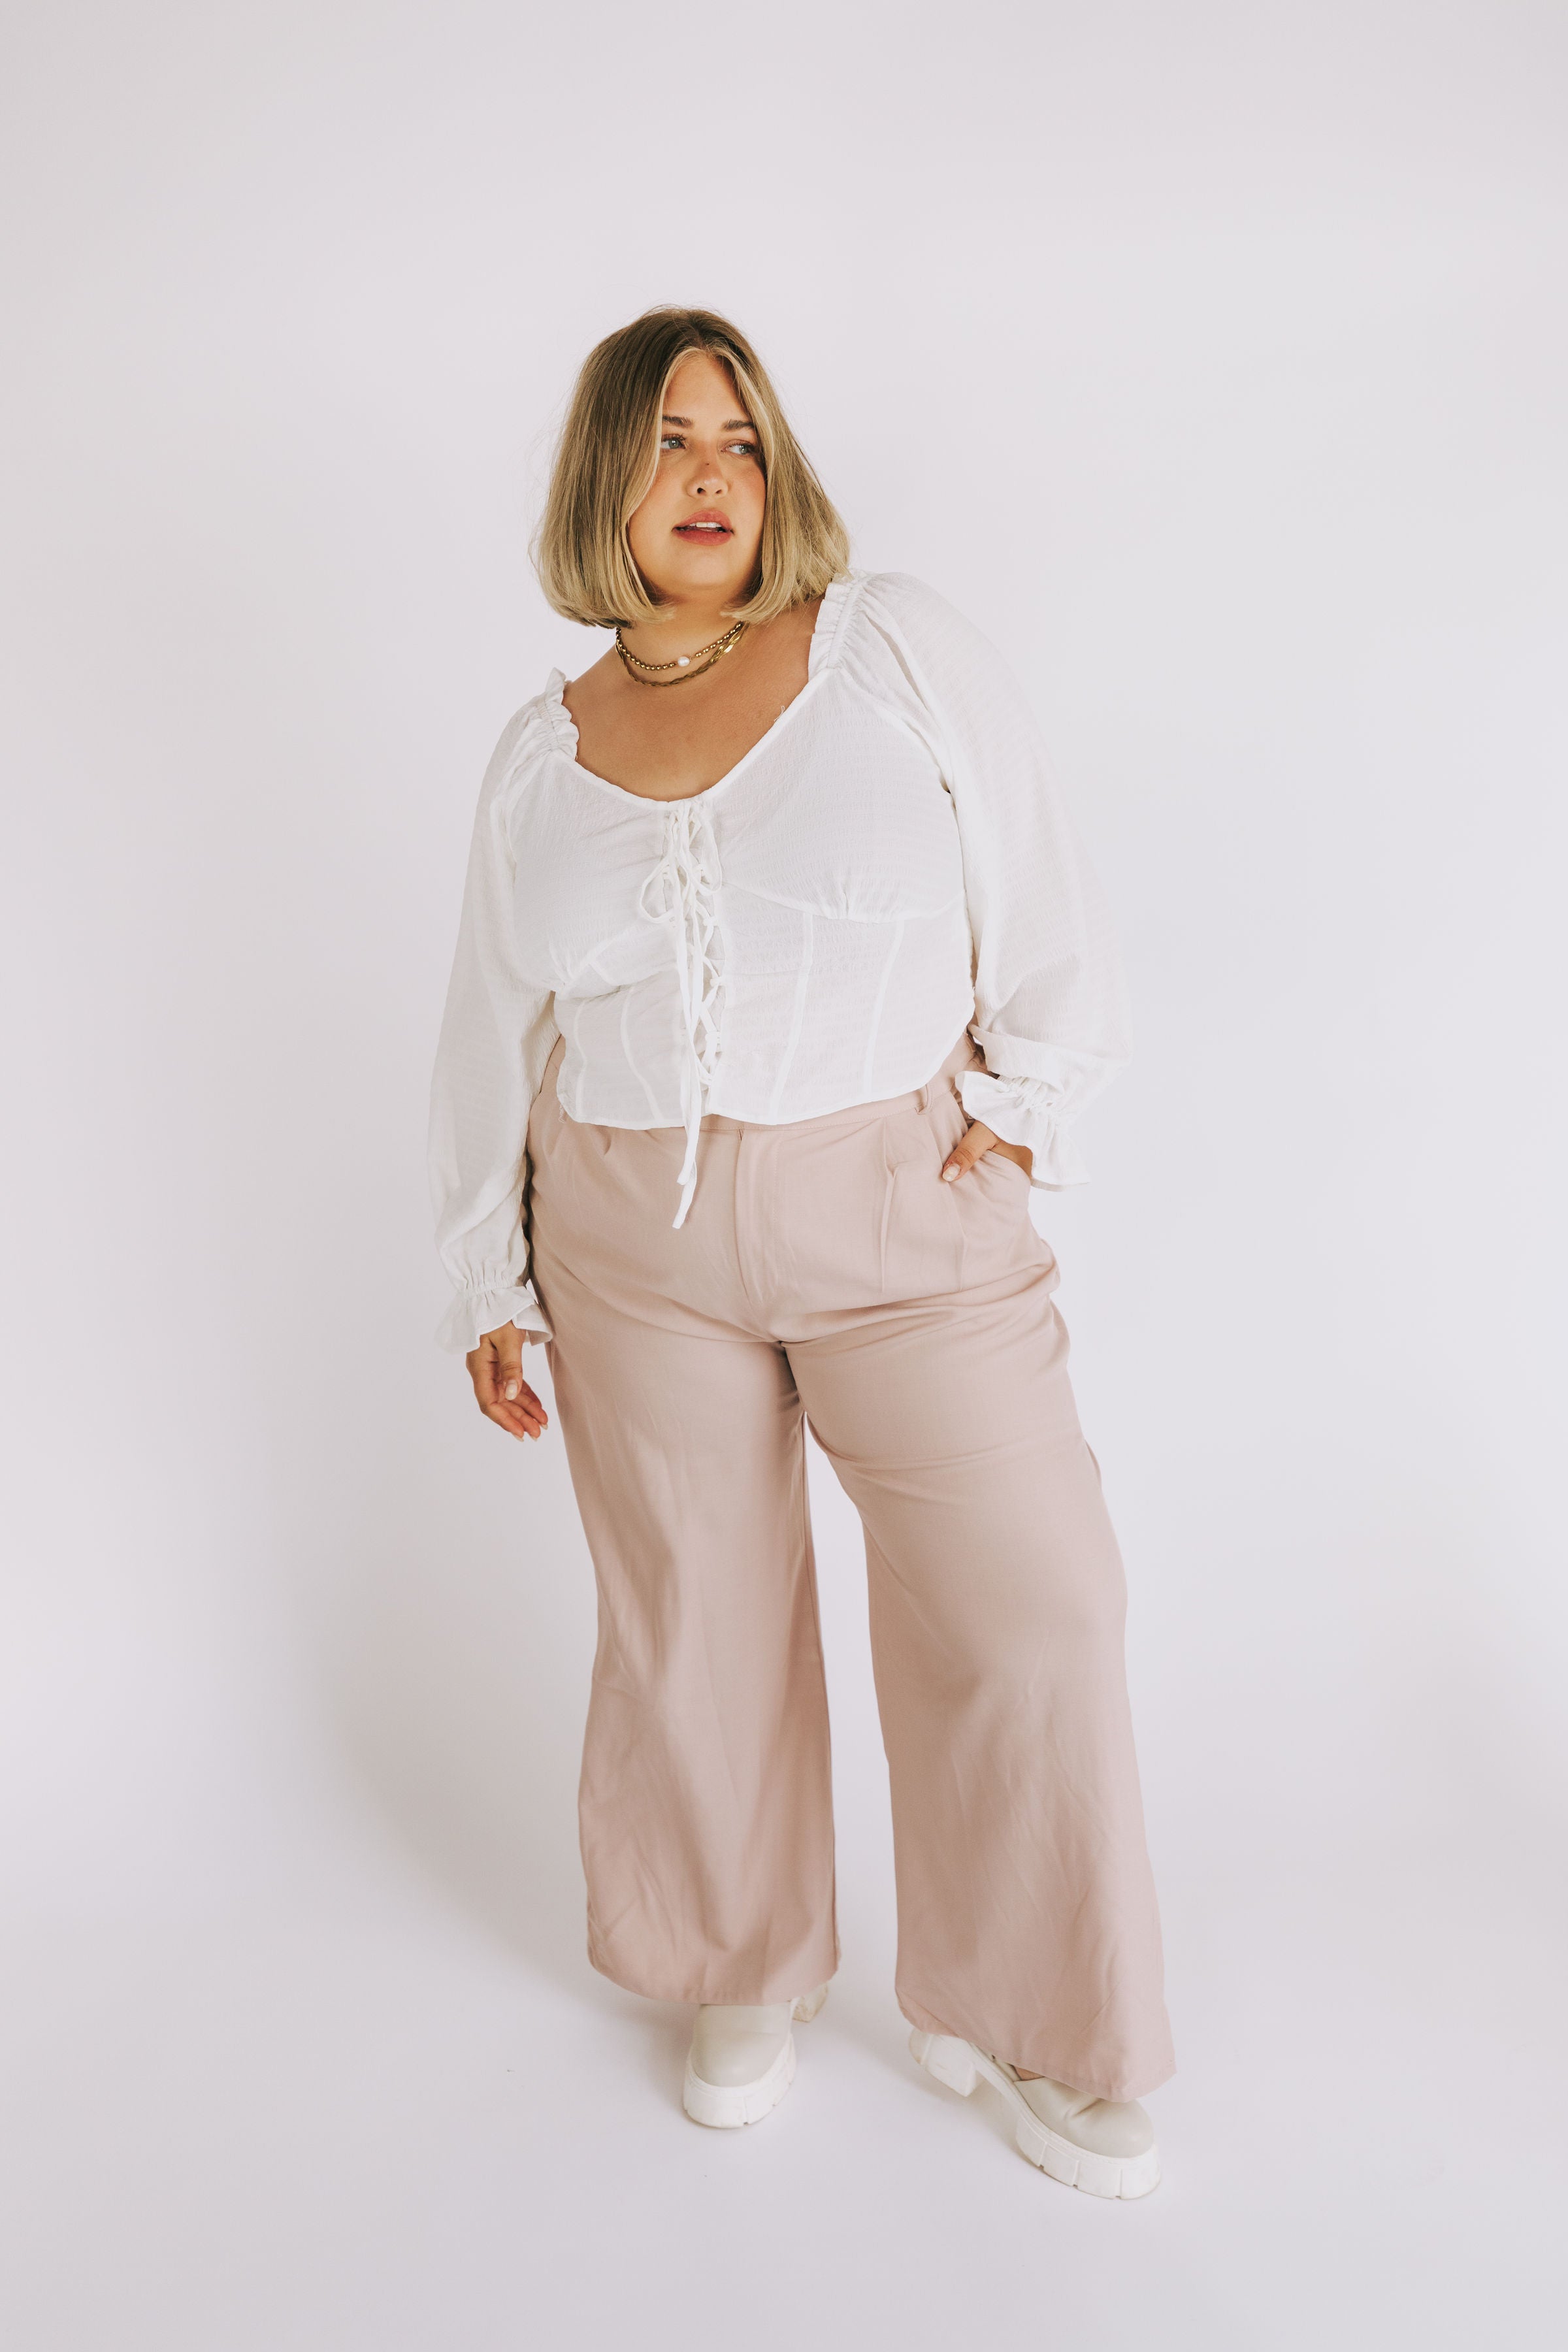 PLUS SIZE - Going Downtown Pants